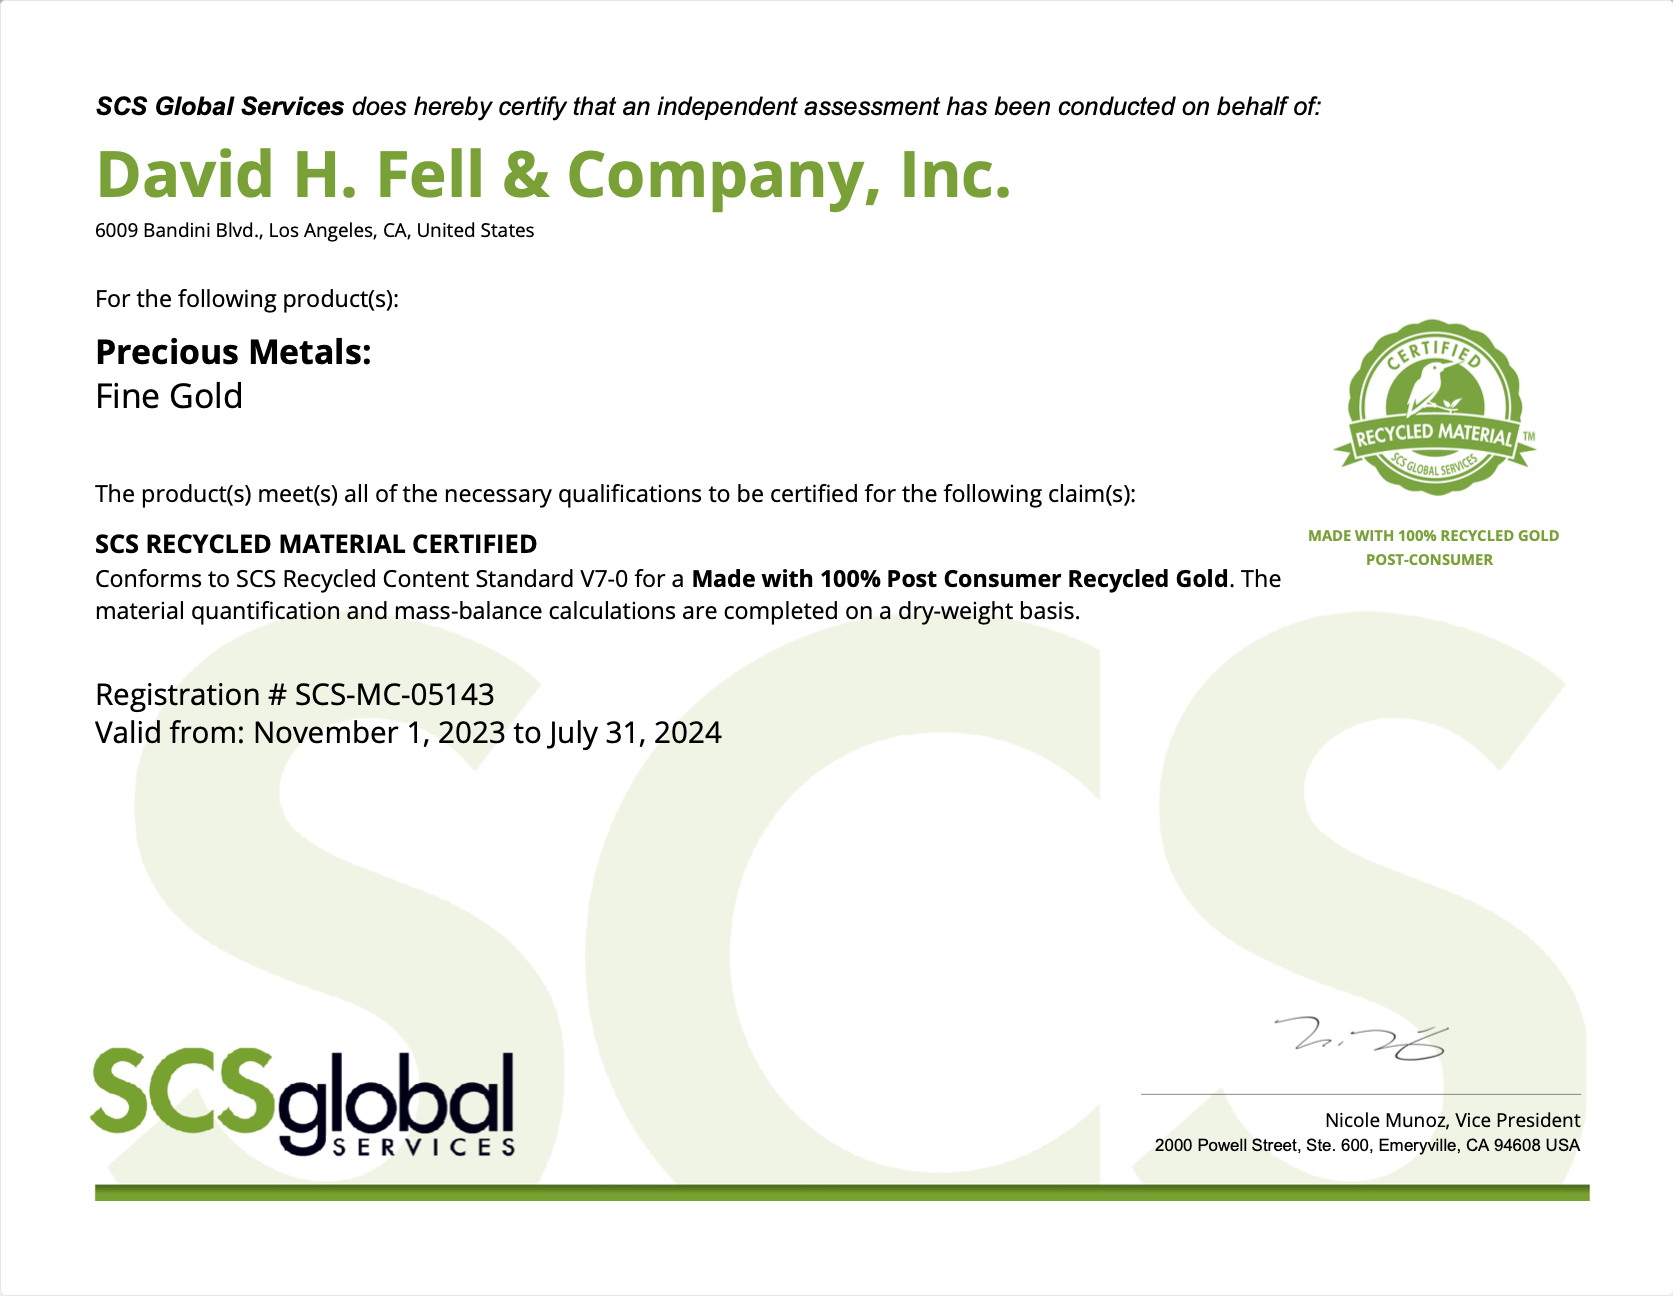 David H. Fell & Co. have achieved the SCS Recycled Certifications!